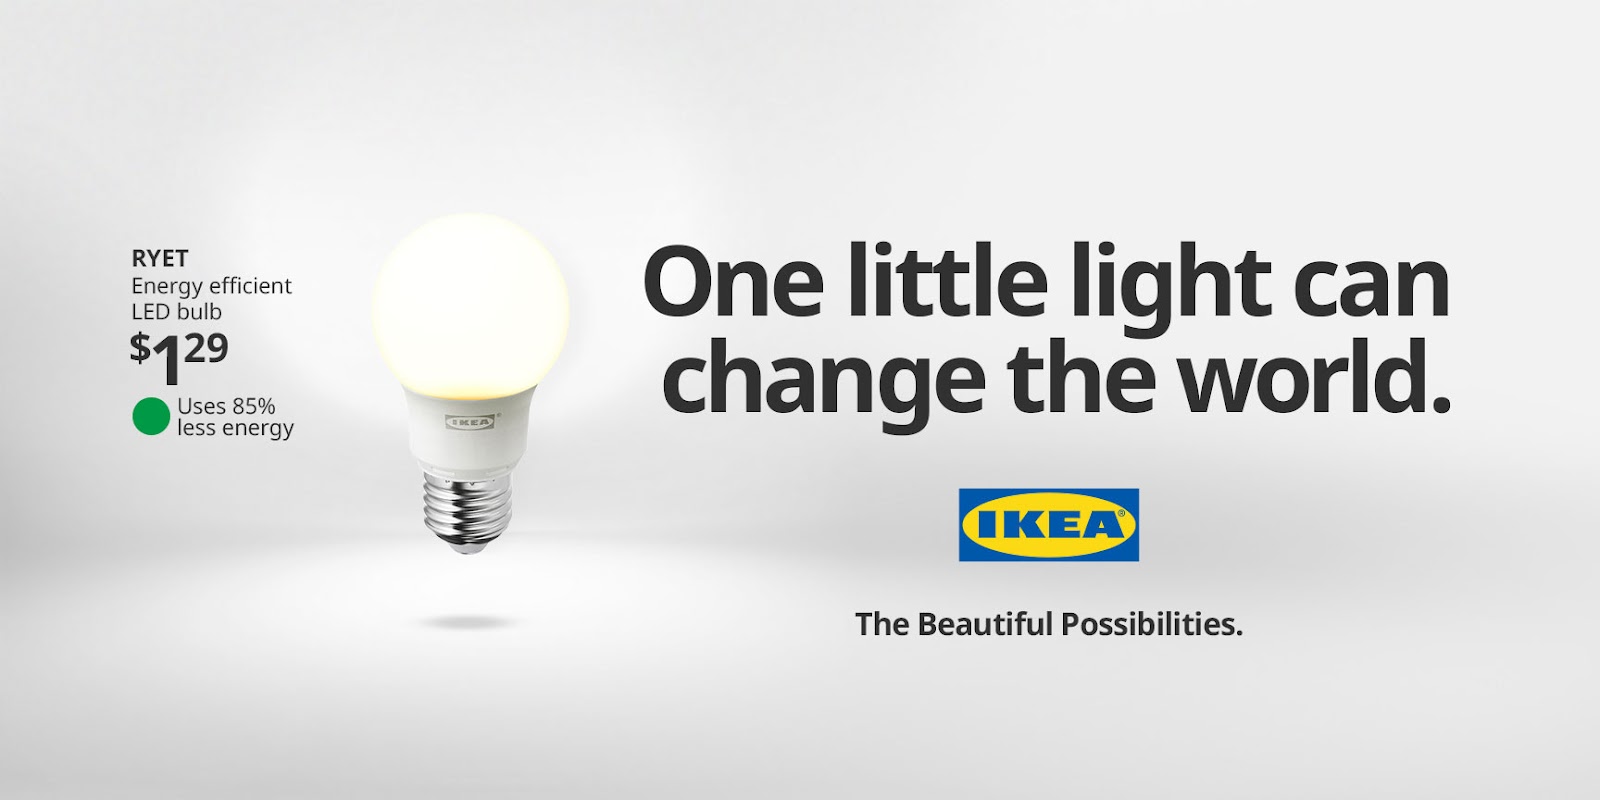 Ikea's sustainability campaigns